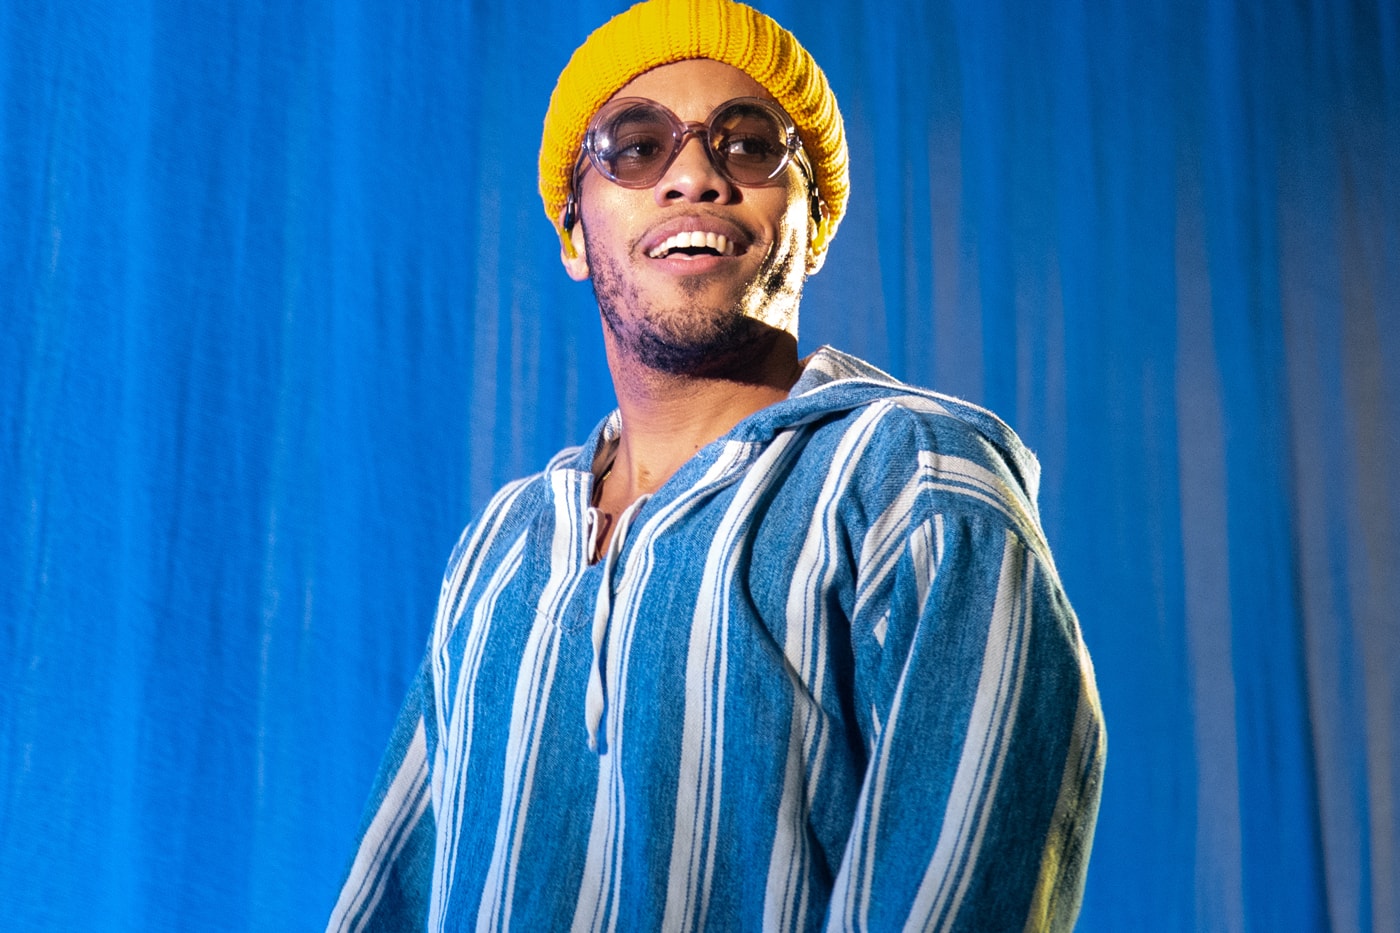 anderson paak 2019 world tour dates tickets details info where buy purchase andys beach club oxnard february spring march north america us europe